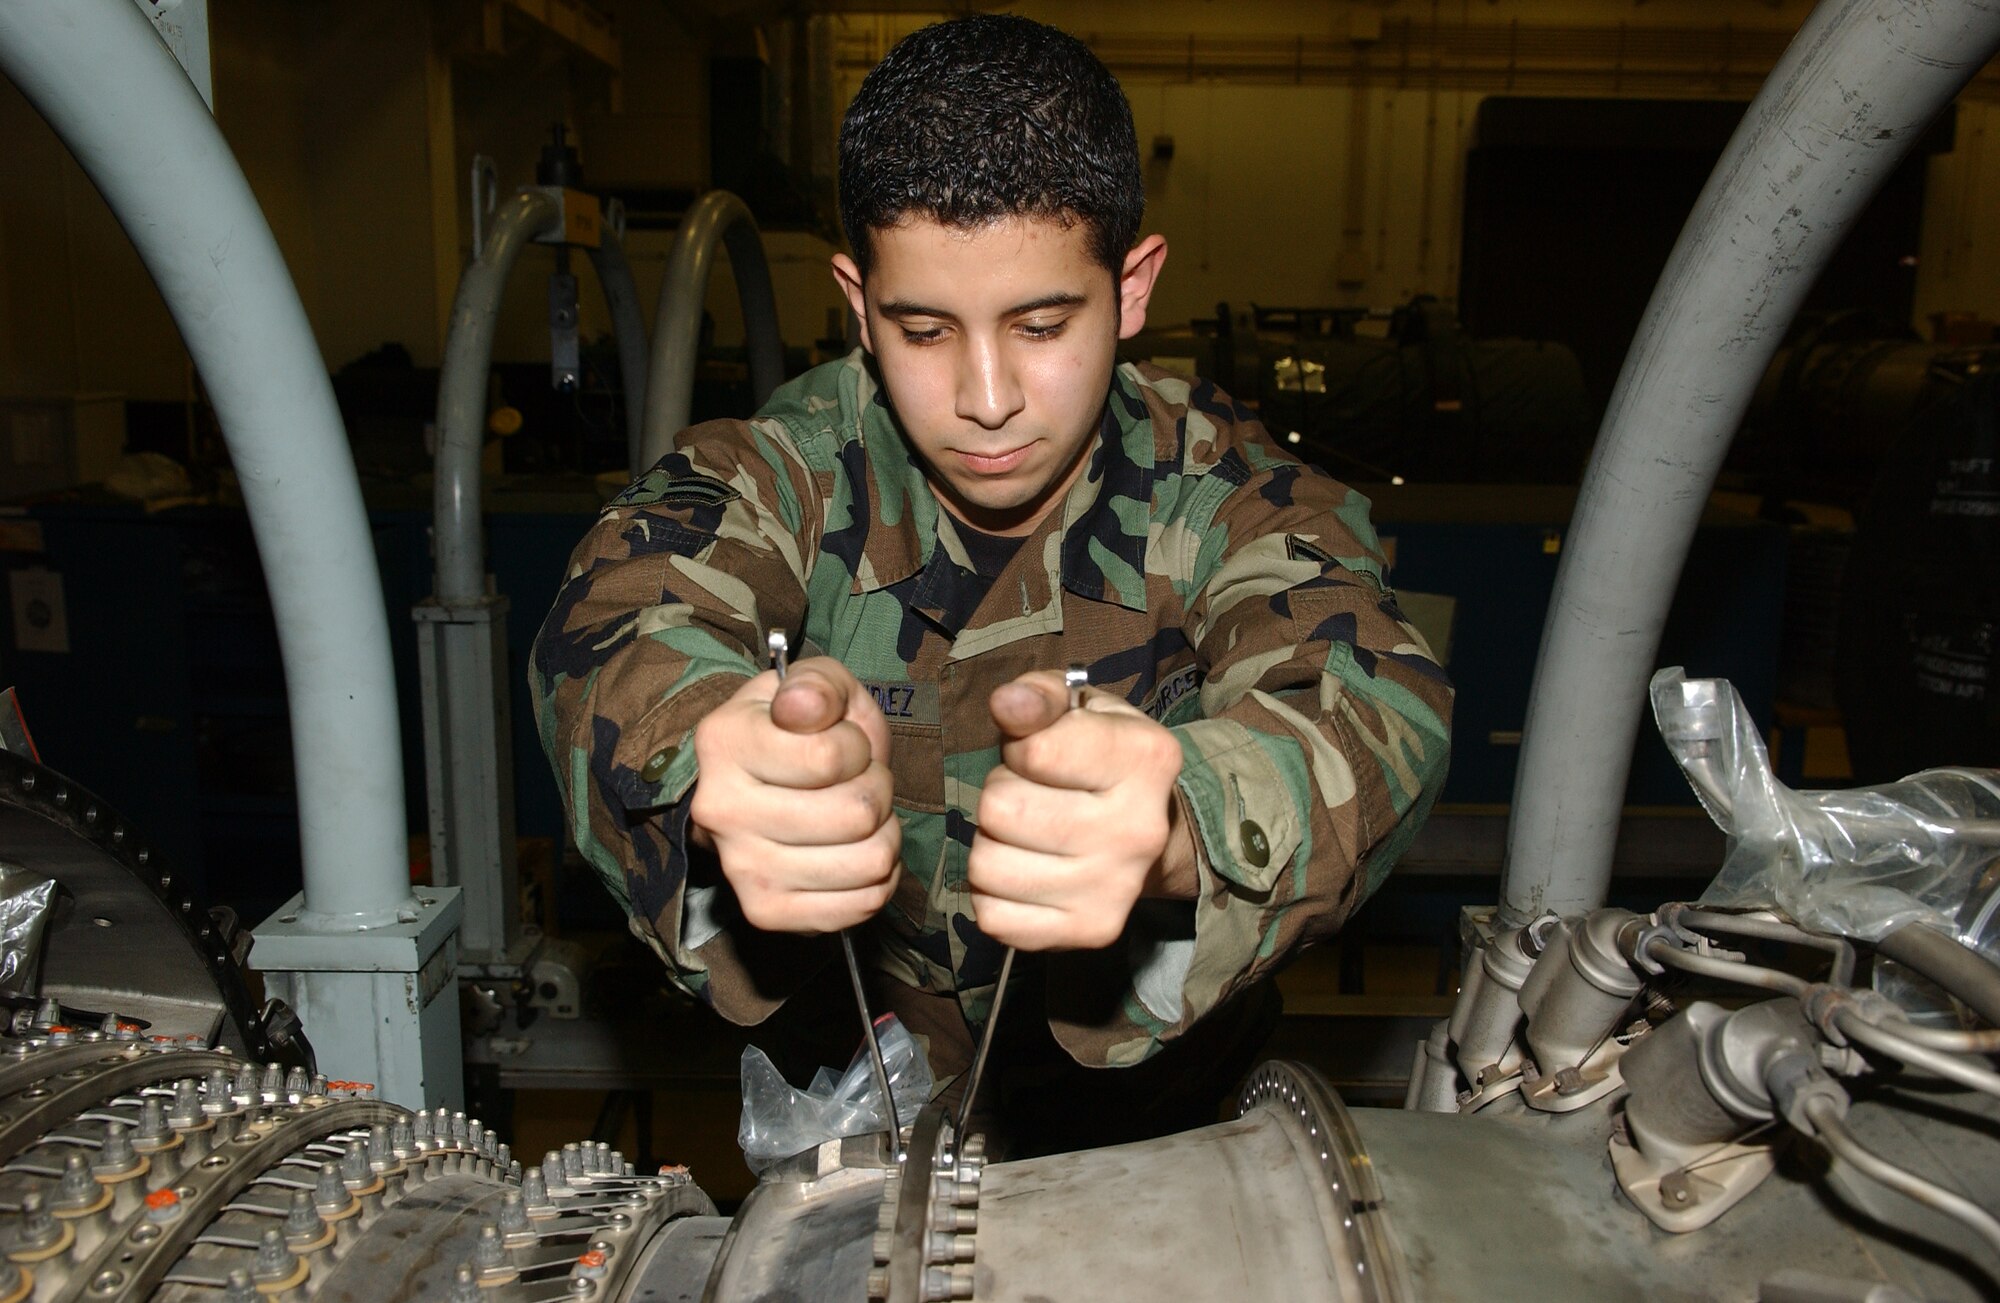 071214-F-0108B-001 MISAWA AIR BASE, Japan -- Airman 1st Class Jonathan Mendez, 35th Maintenance Squadron, tightens nuts and bolts on an F-16 jet engine.  Airman Mendez is a crew chief for the propulsion flight, known as the Queen Bee, and fixes F-16 engines for Misawa, Osan and Kunsan Air Base.
(U.S. Air Force photo by Senior Airman Robert Barnett)